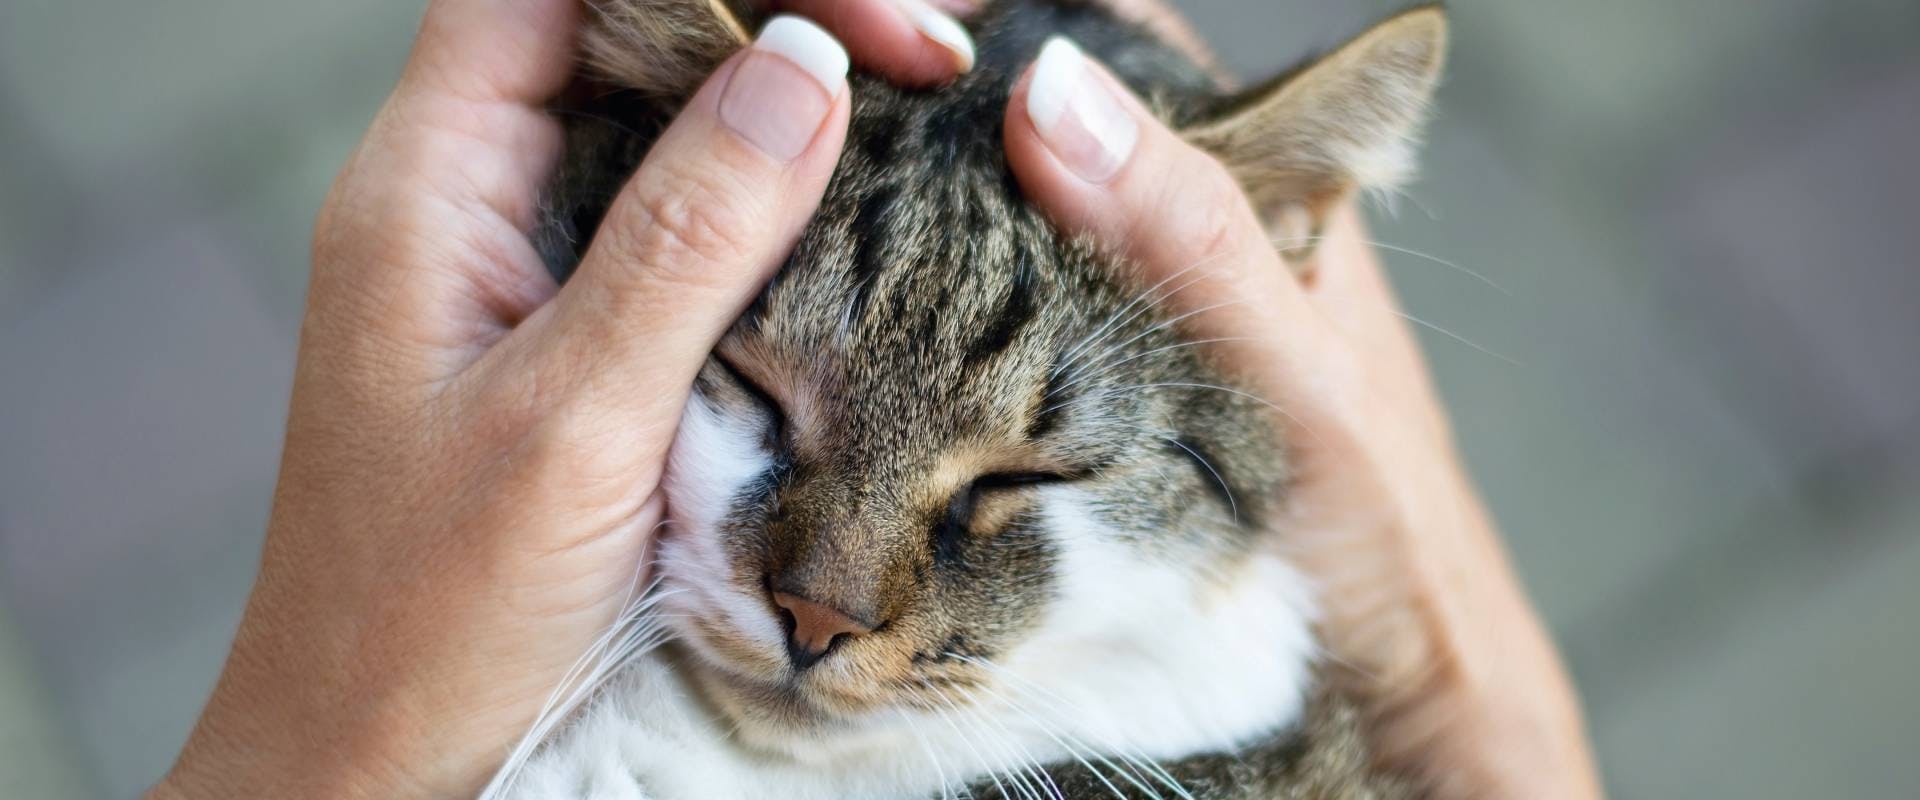 An older cat being cared for.